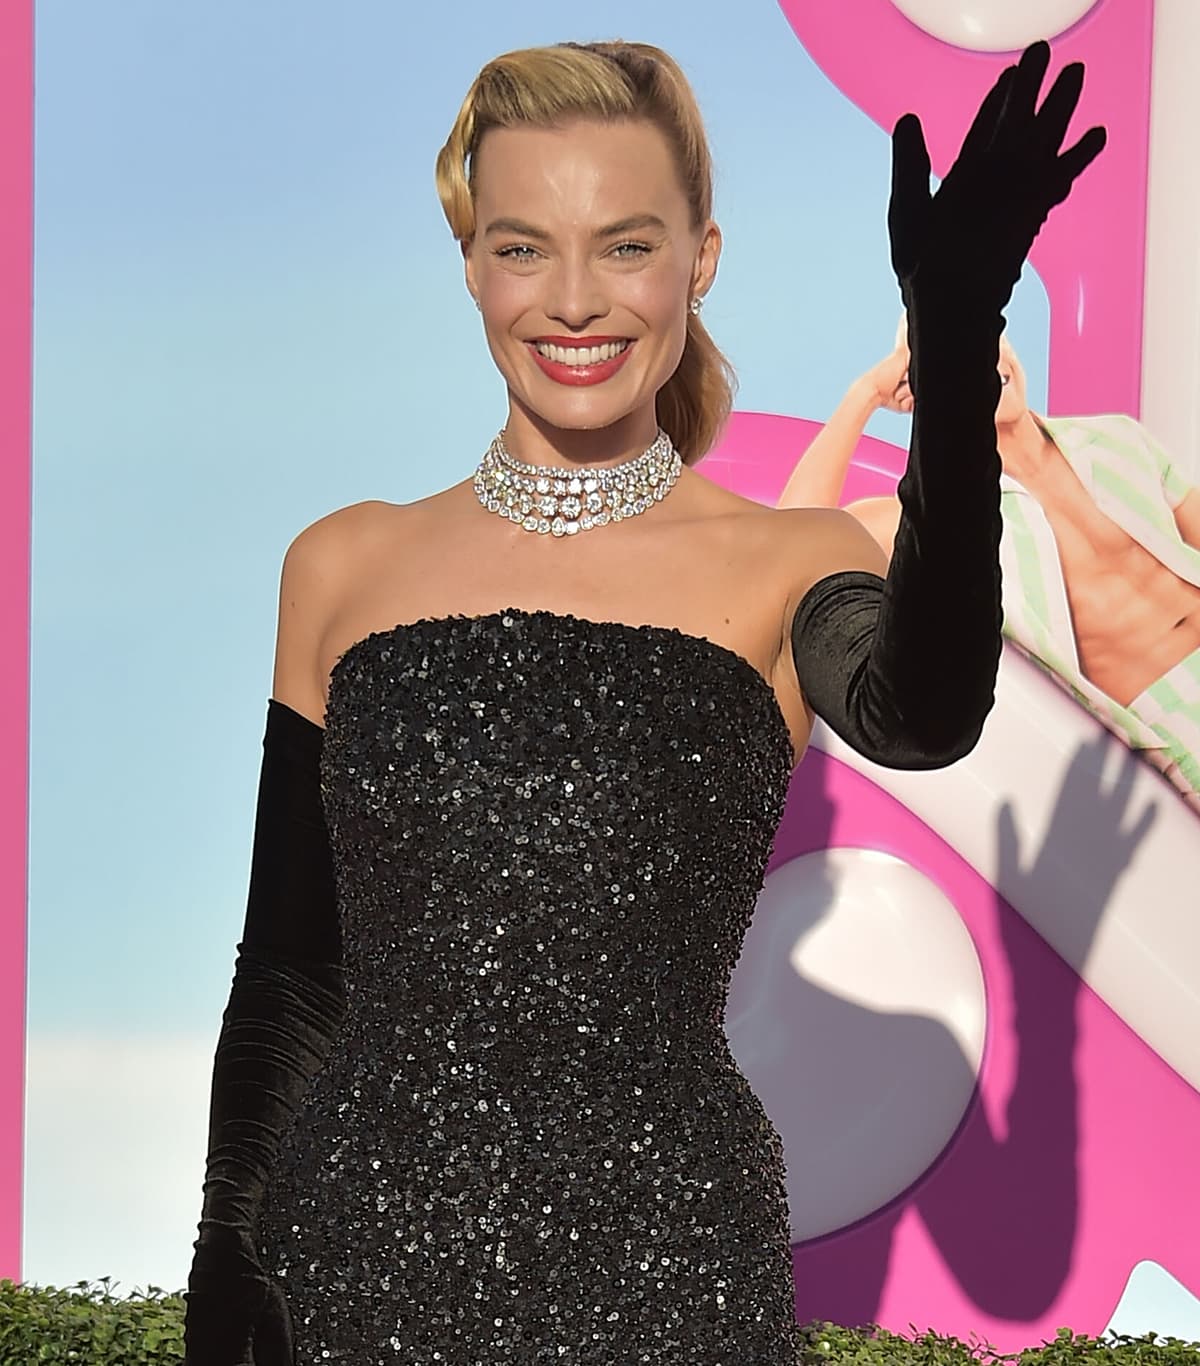 Margot Robbie completes her 1960s Barbie look with opera gloves, diamond jewelry, a retro ponytail, and a bright red lip color